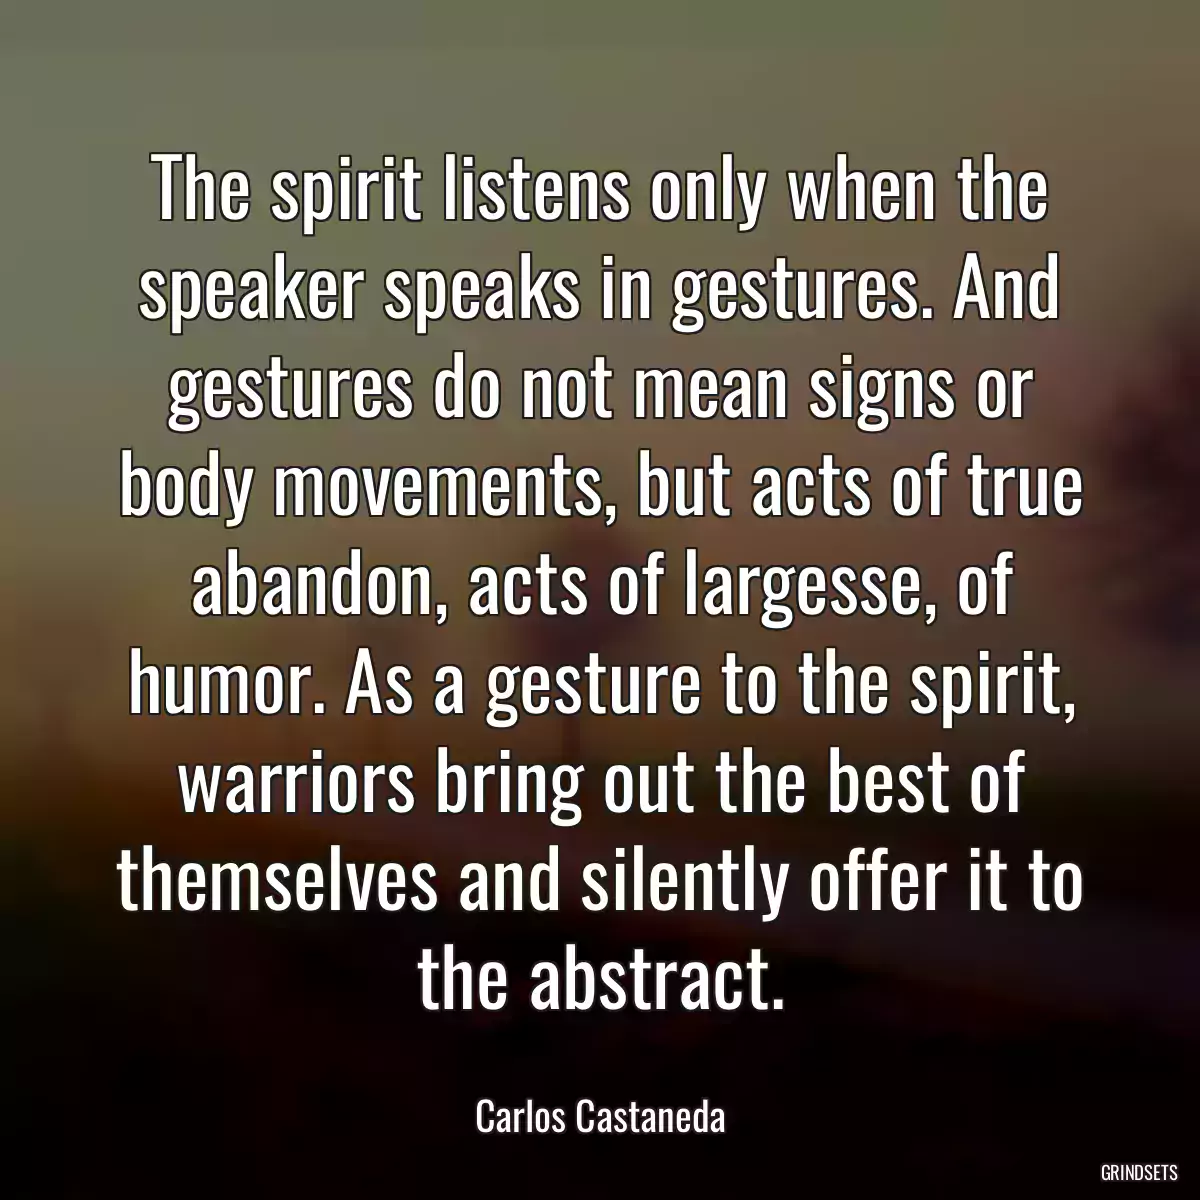 The spirit listens only when the speaker speaks in gestures. And gestures do not mean signs or body movements, but acts of true abandon, acts of largesse, of humor. As a gesture to the spirit, warriors bring out the best of themselves and silently offer it to the abstract.